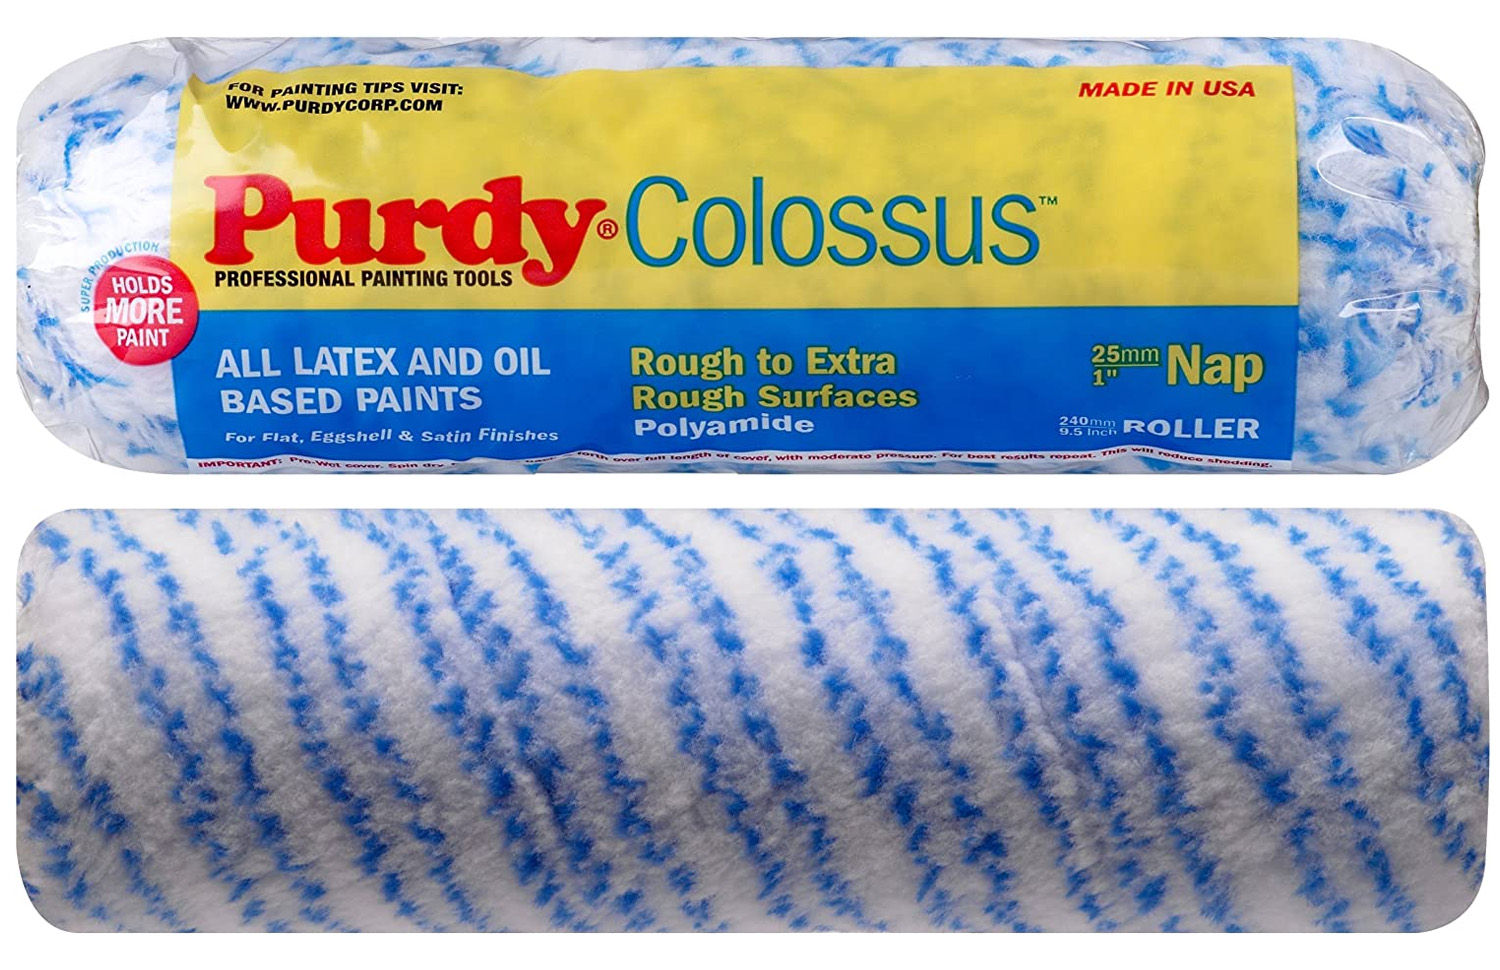 Purdy Colossus 1 inch nap roller